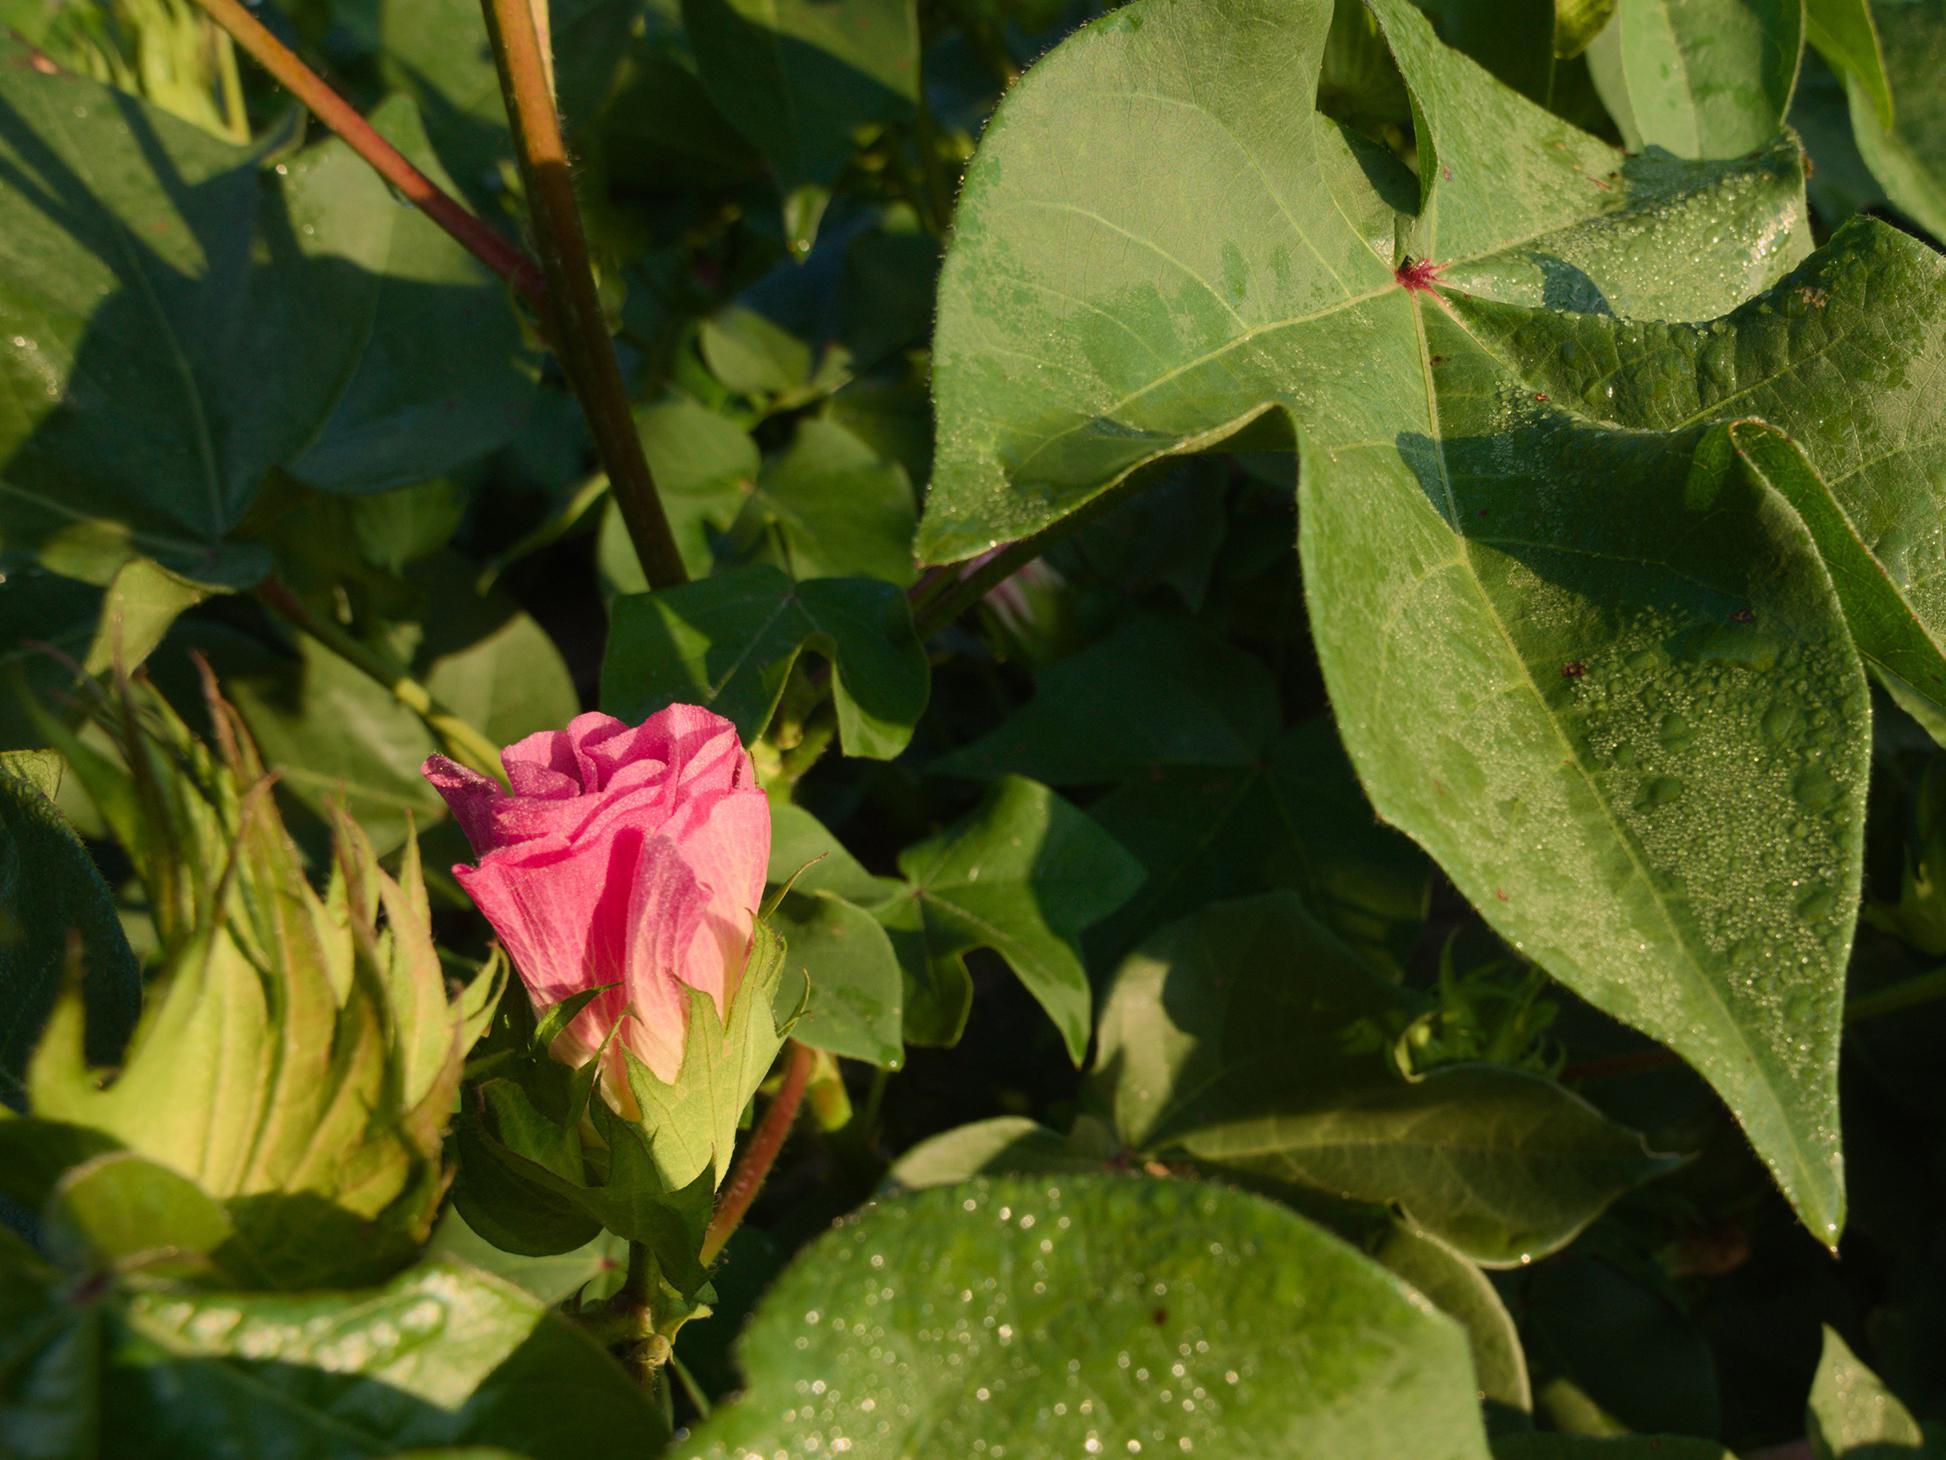 A pink cotton bloom sits among green leaves.